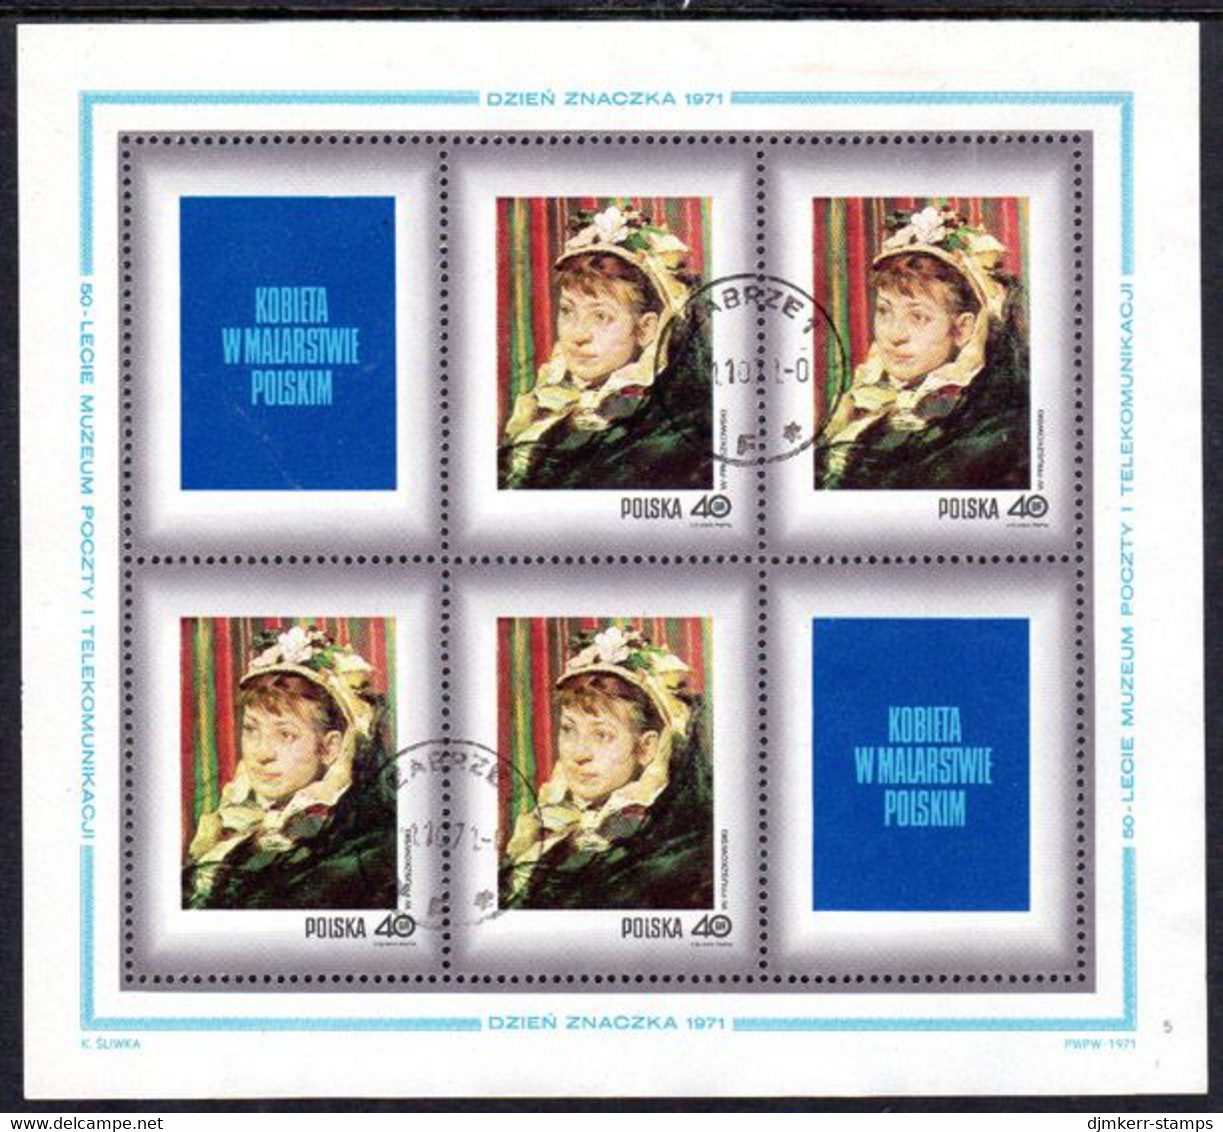 POLAND 1971 Stamp Day: Paintings Of Women Sheetlets  Used . Michel 2110-17 Kb - Usati